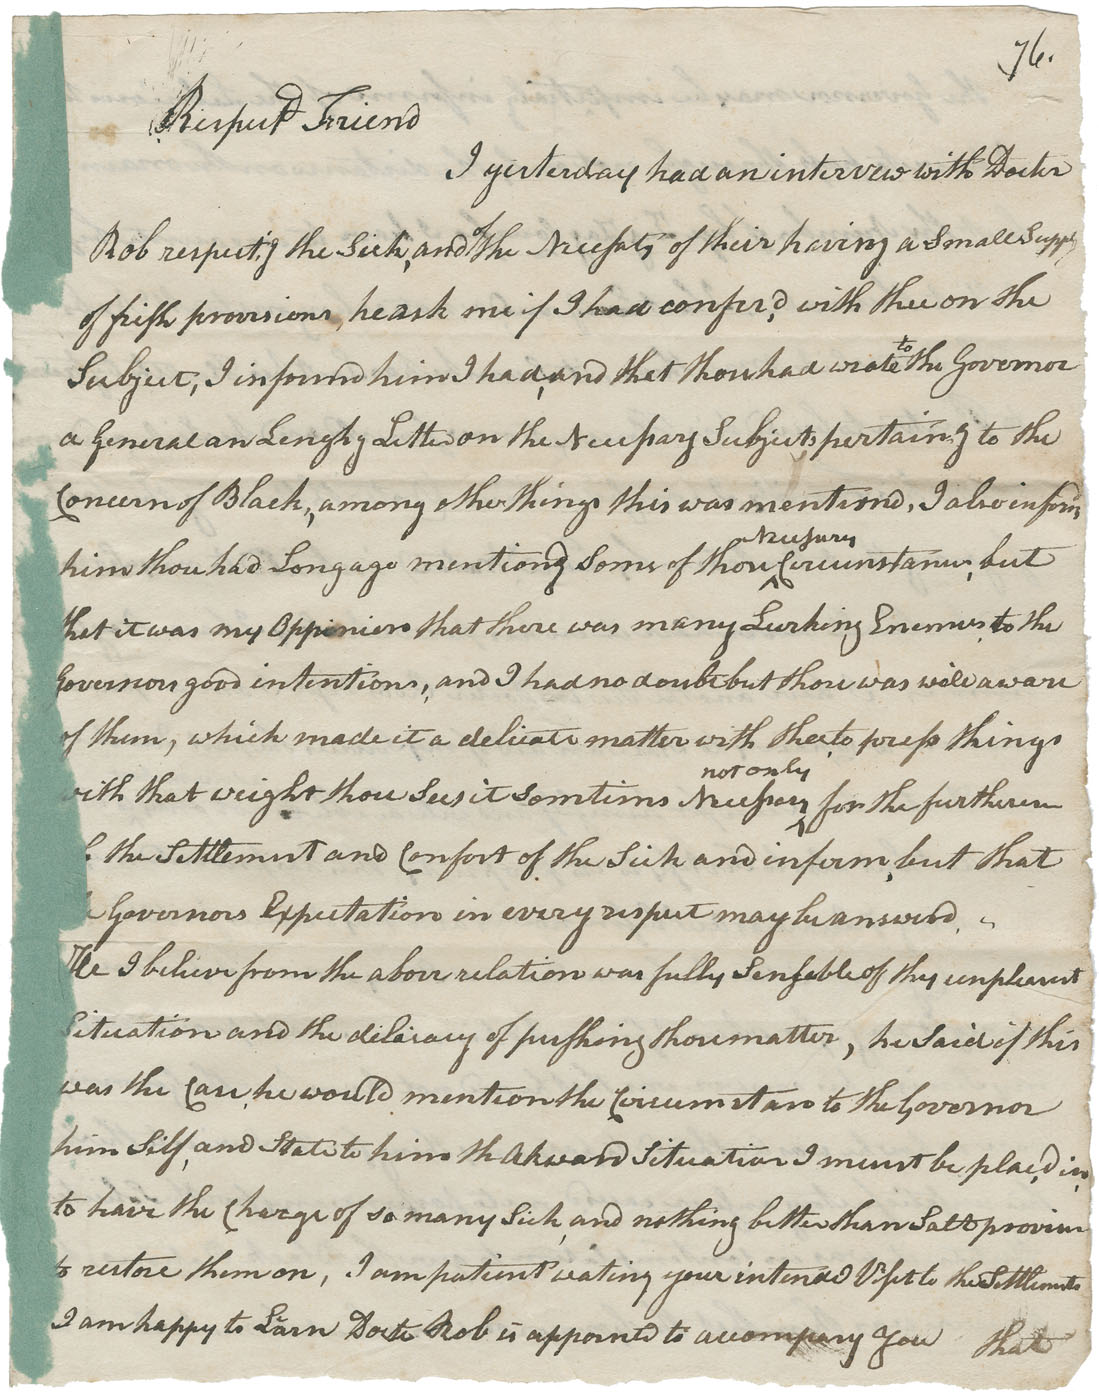 african-heritage : Letter from Mr. Seth Coleman to (___) relating to the Black Refugees settling at Preston and smallpox among the families there